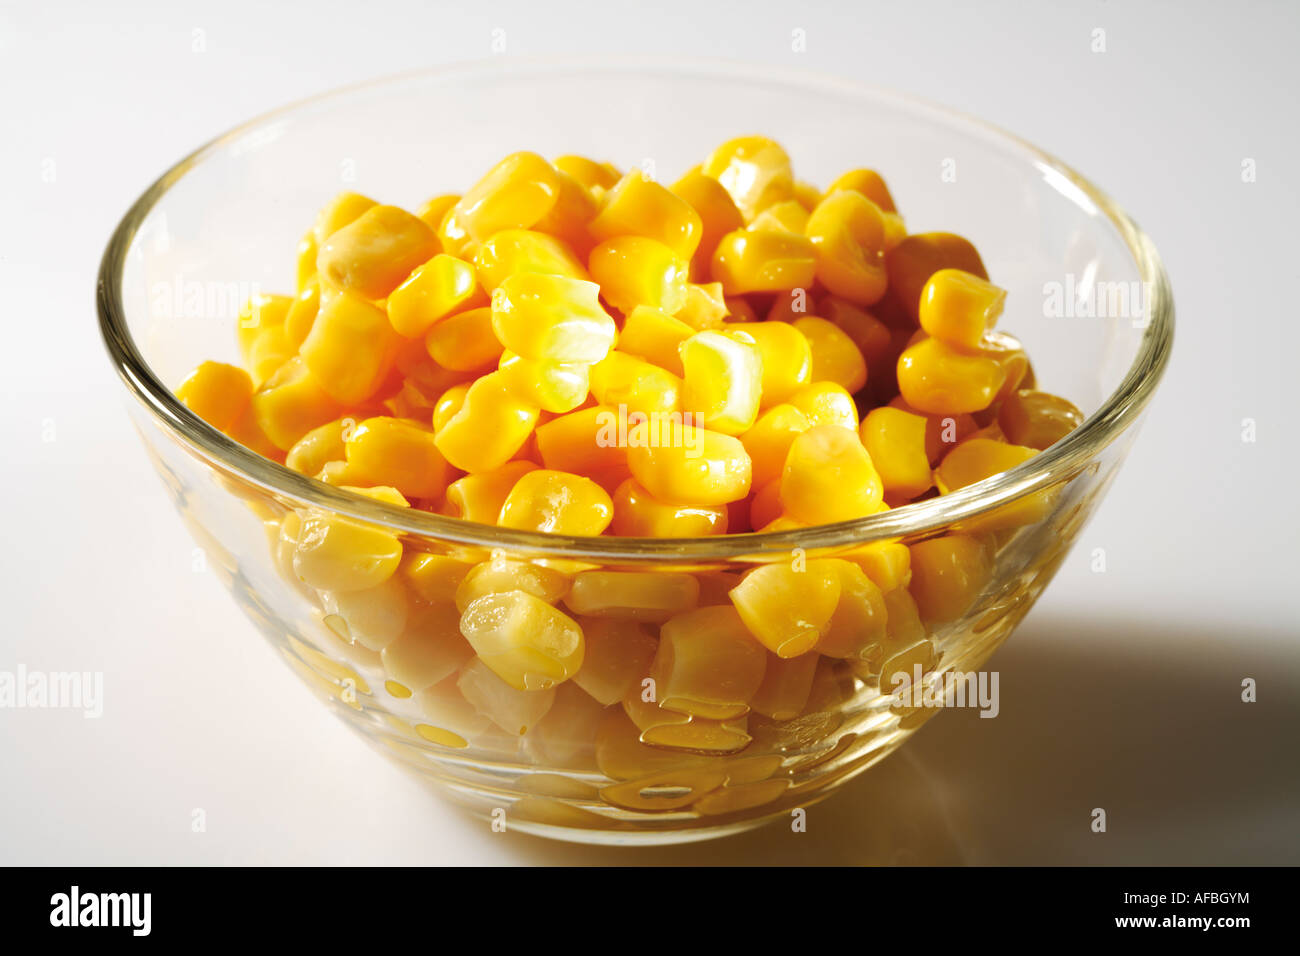 Corn in bowl, close-up Stock Photo